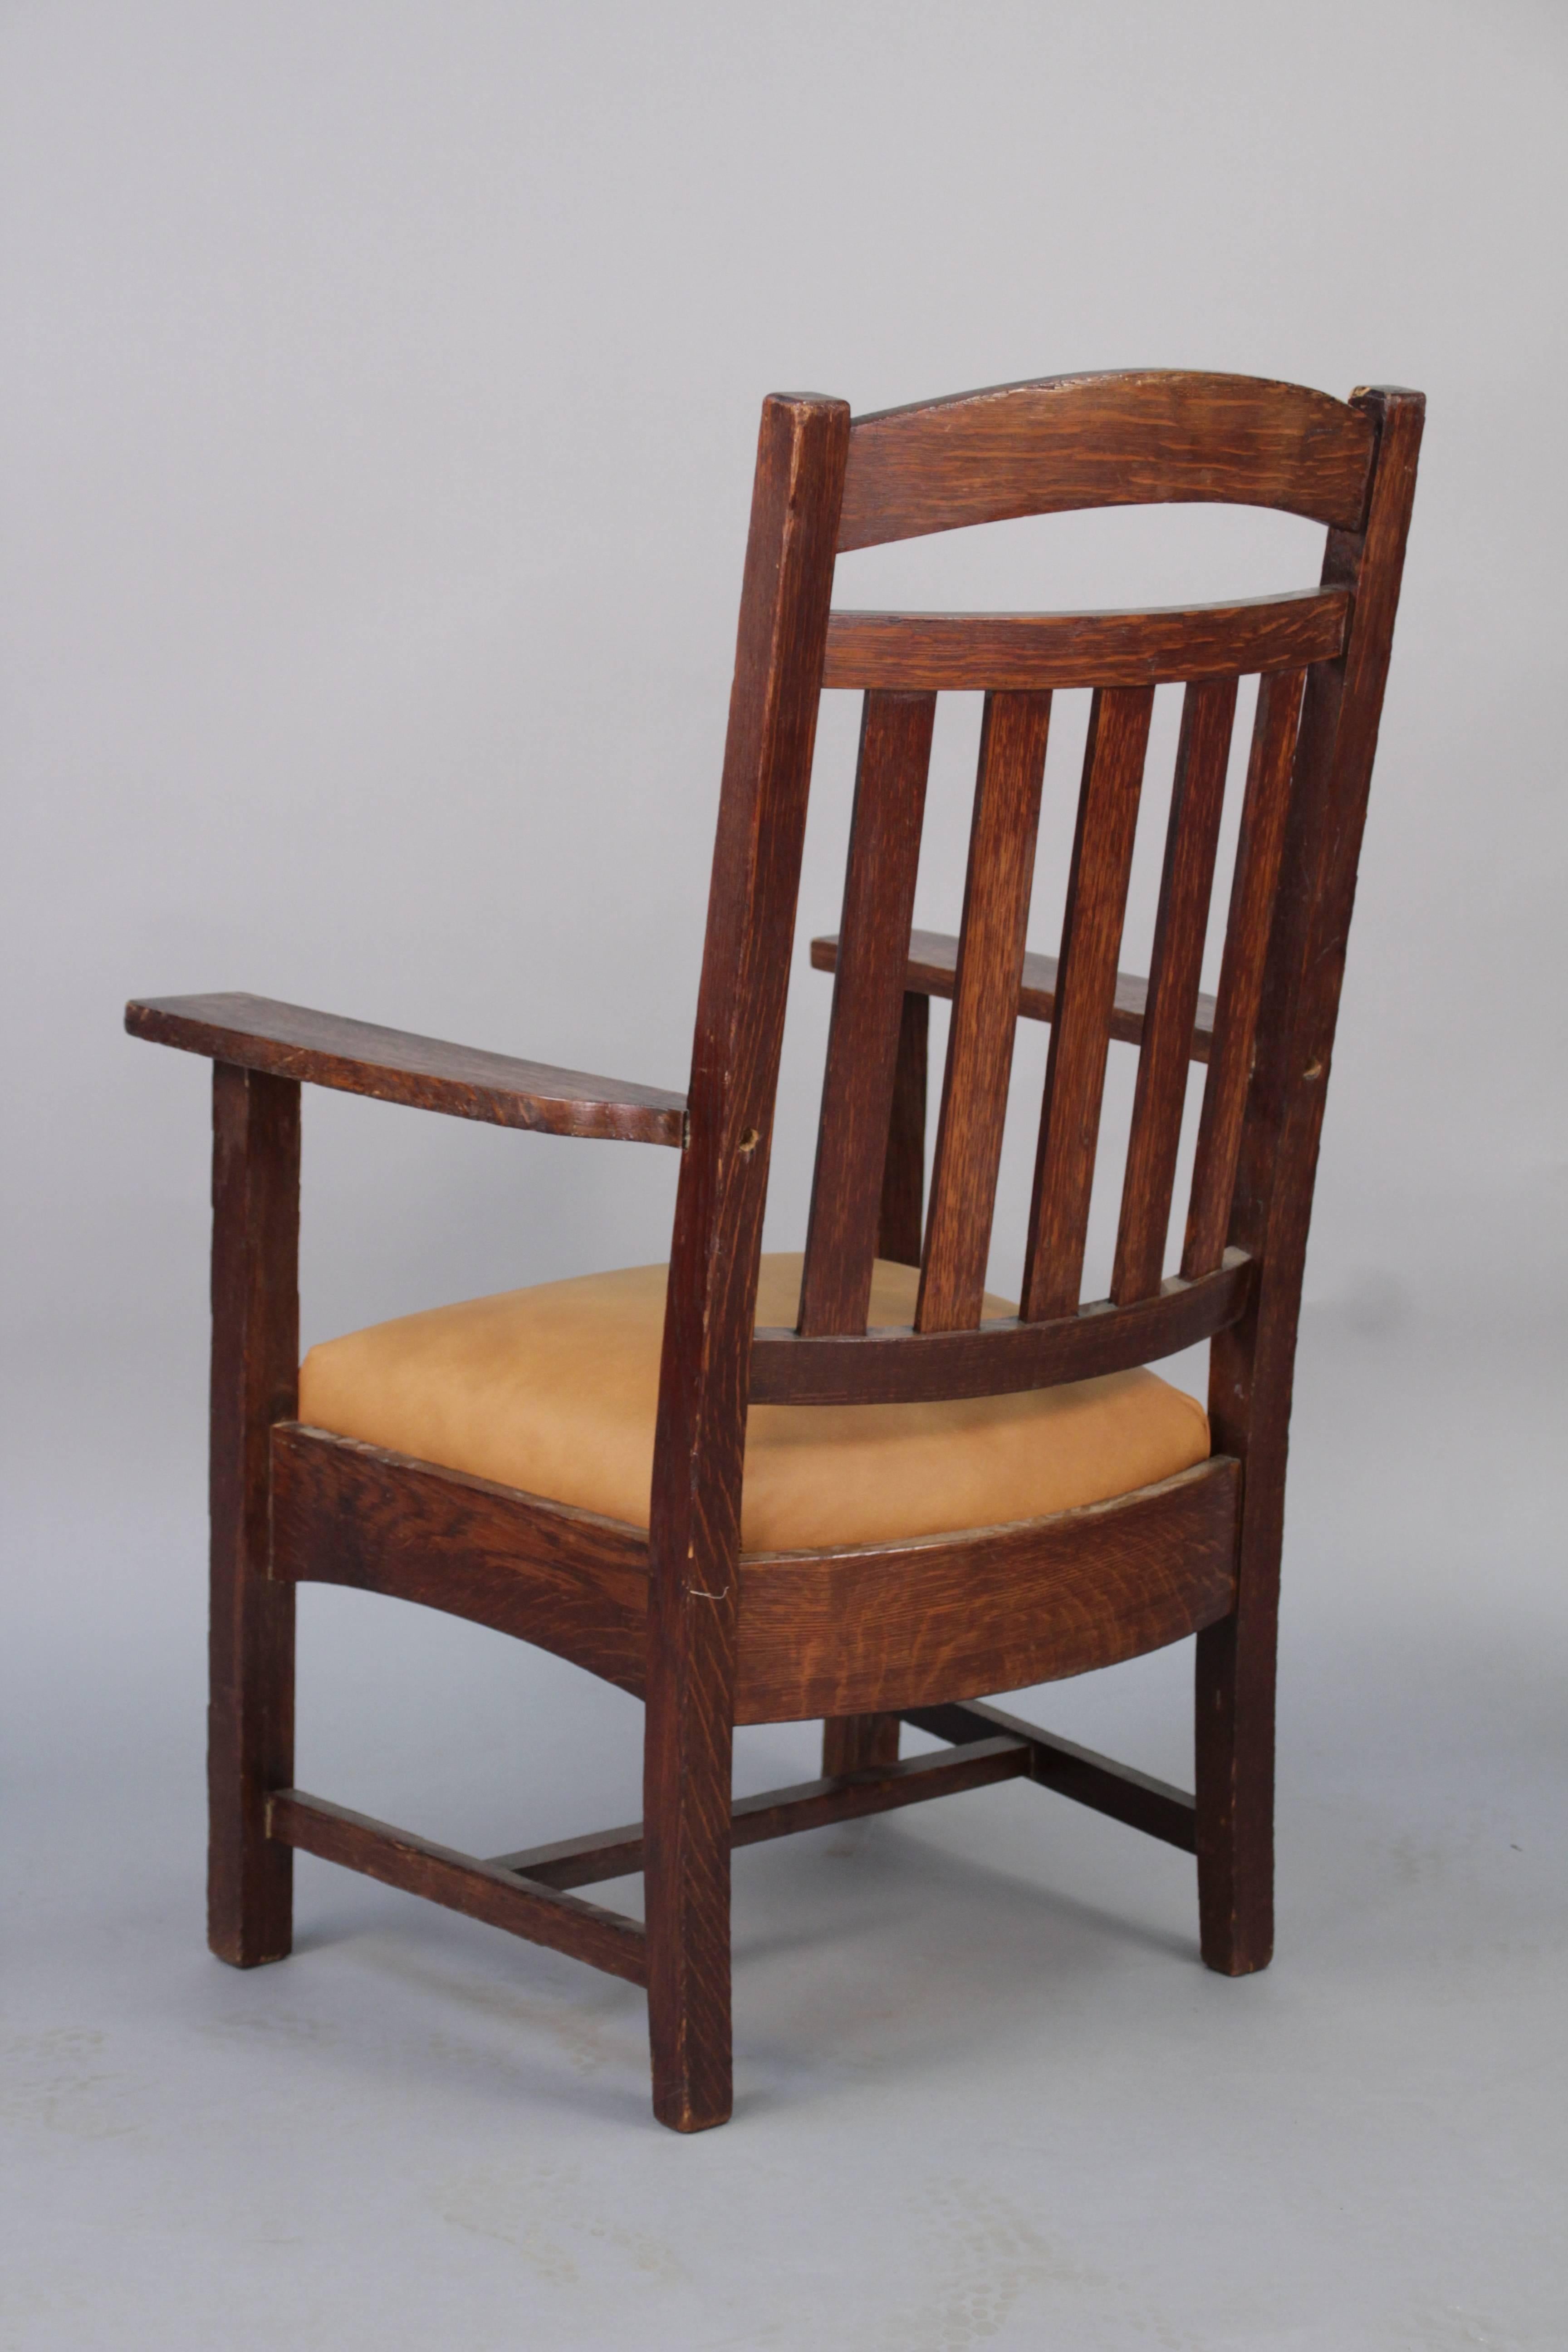 American 1910 Arts & Crafts Period Tall Back Armchair